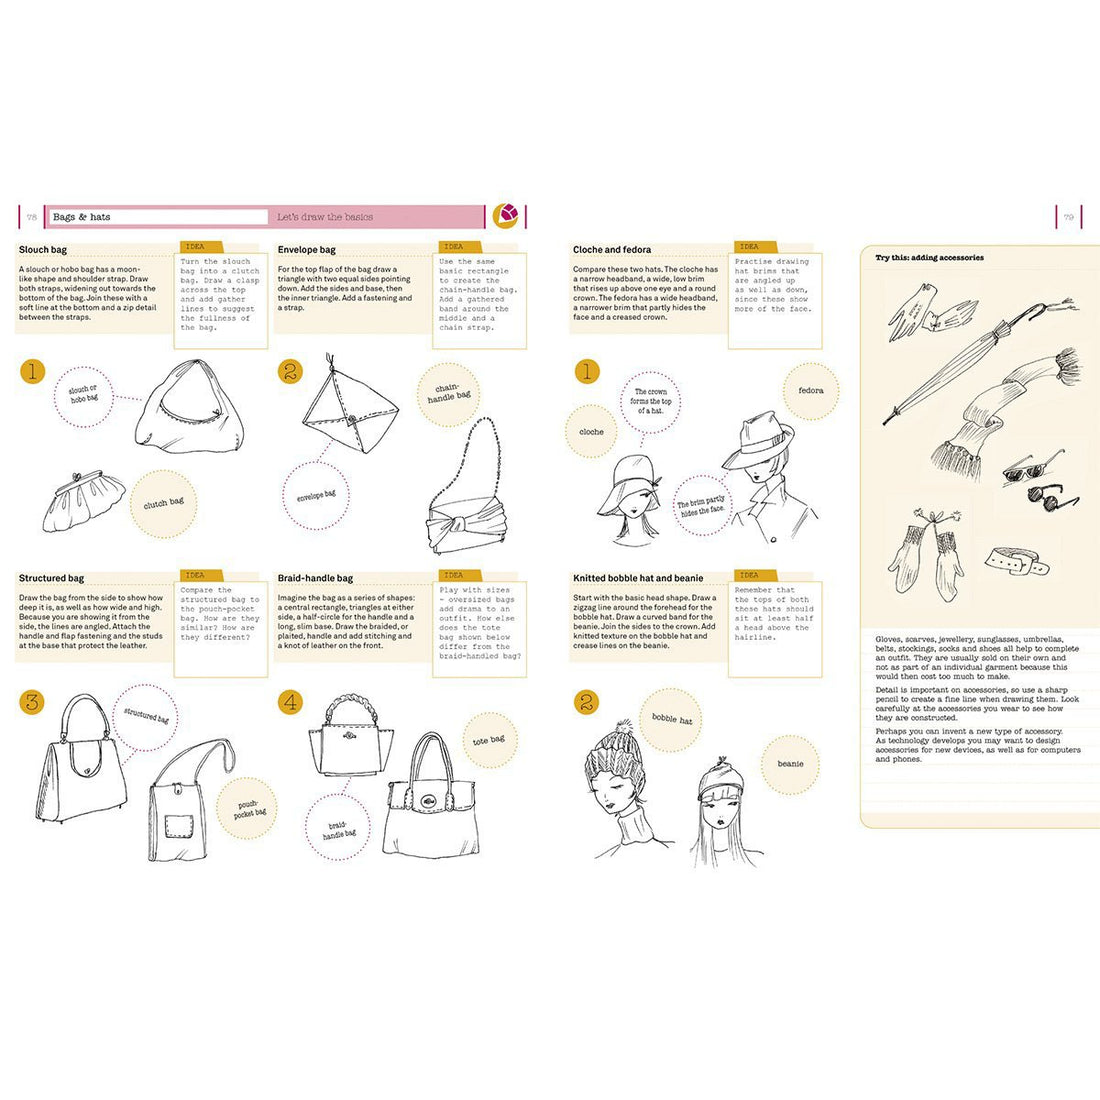 book-how-to-draw-like-a-fashion-designer-tips-from-the-top-fashion-designers- (5)